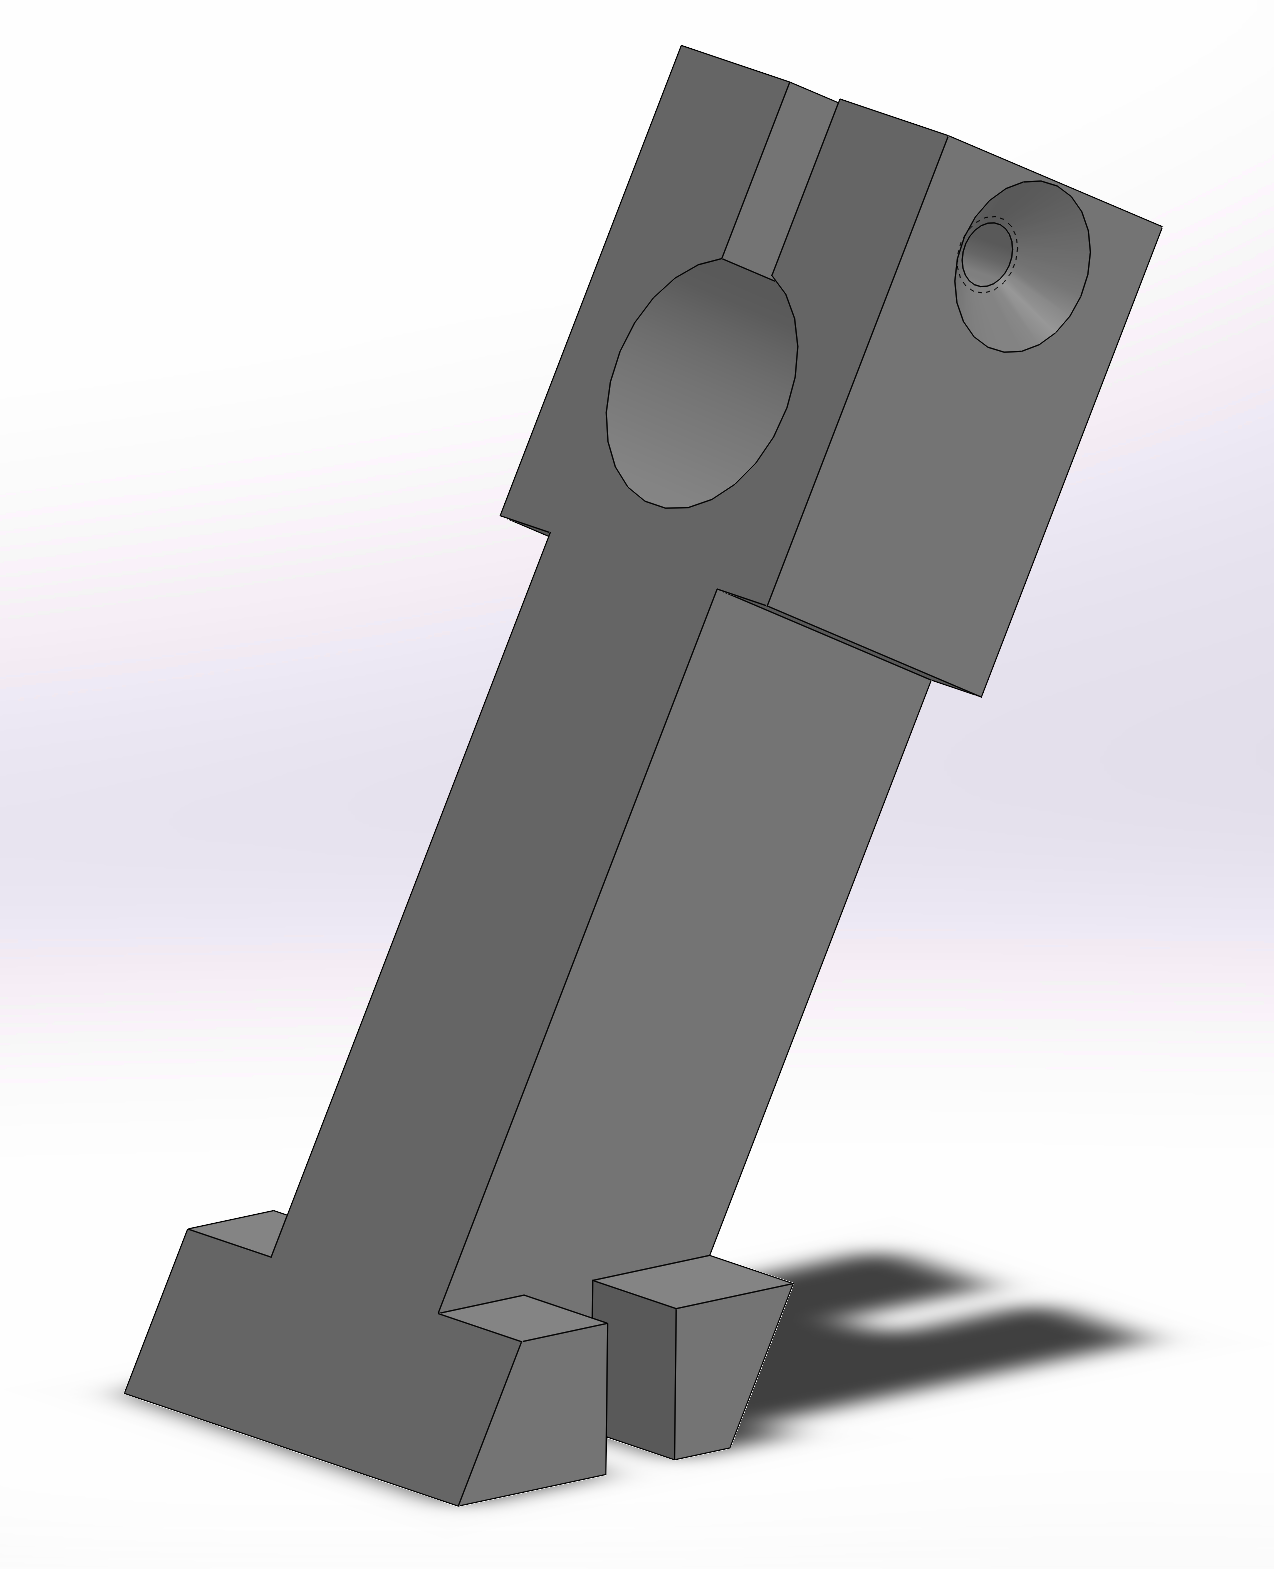 The revised CAD of the holder (V2)